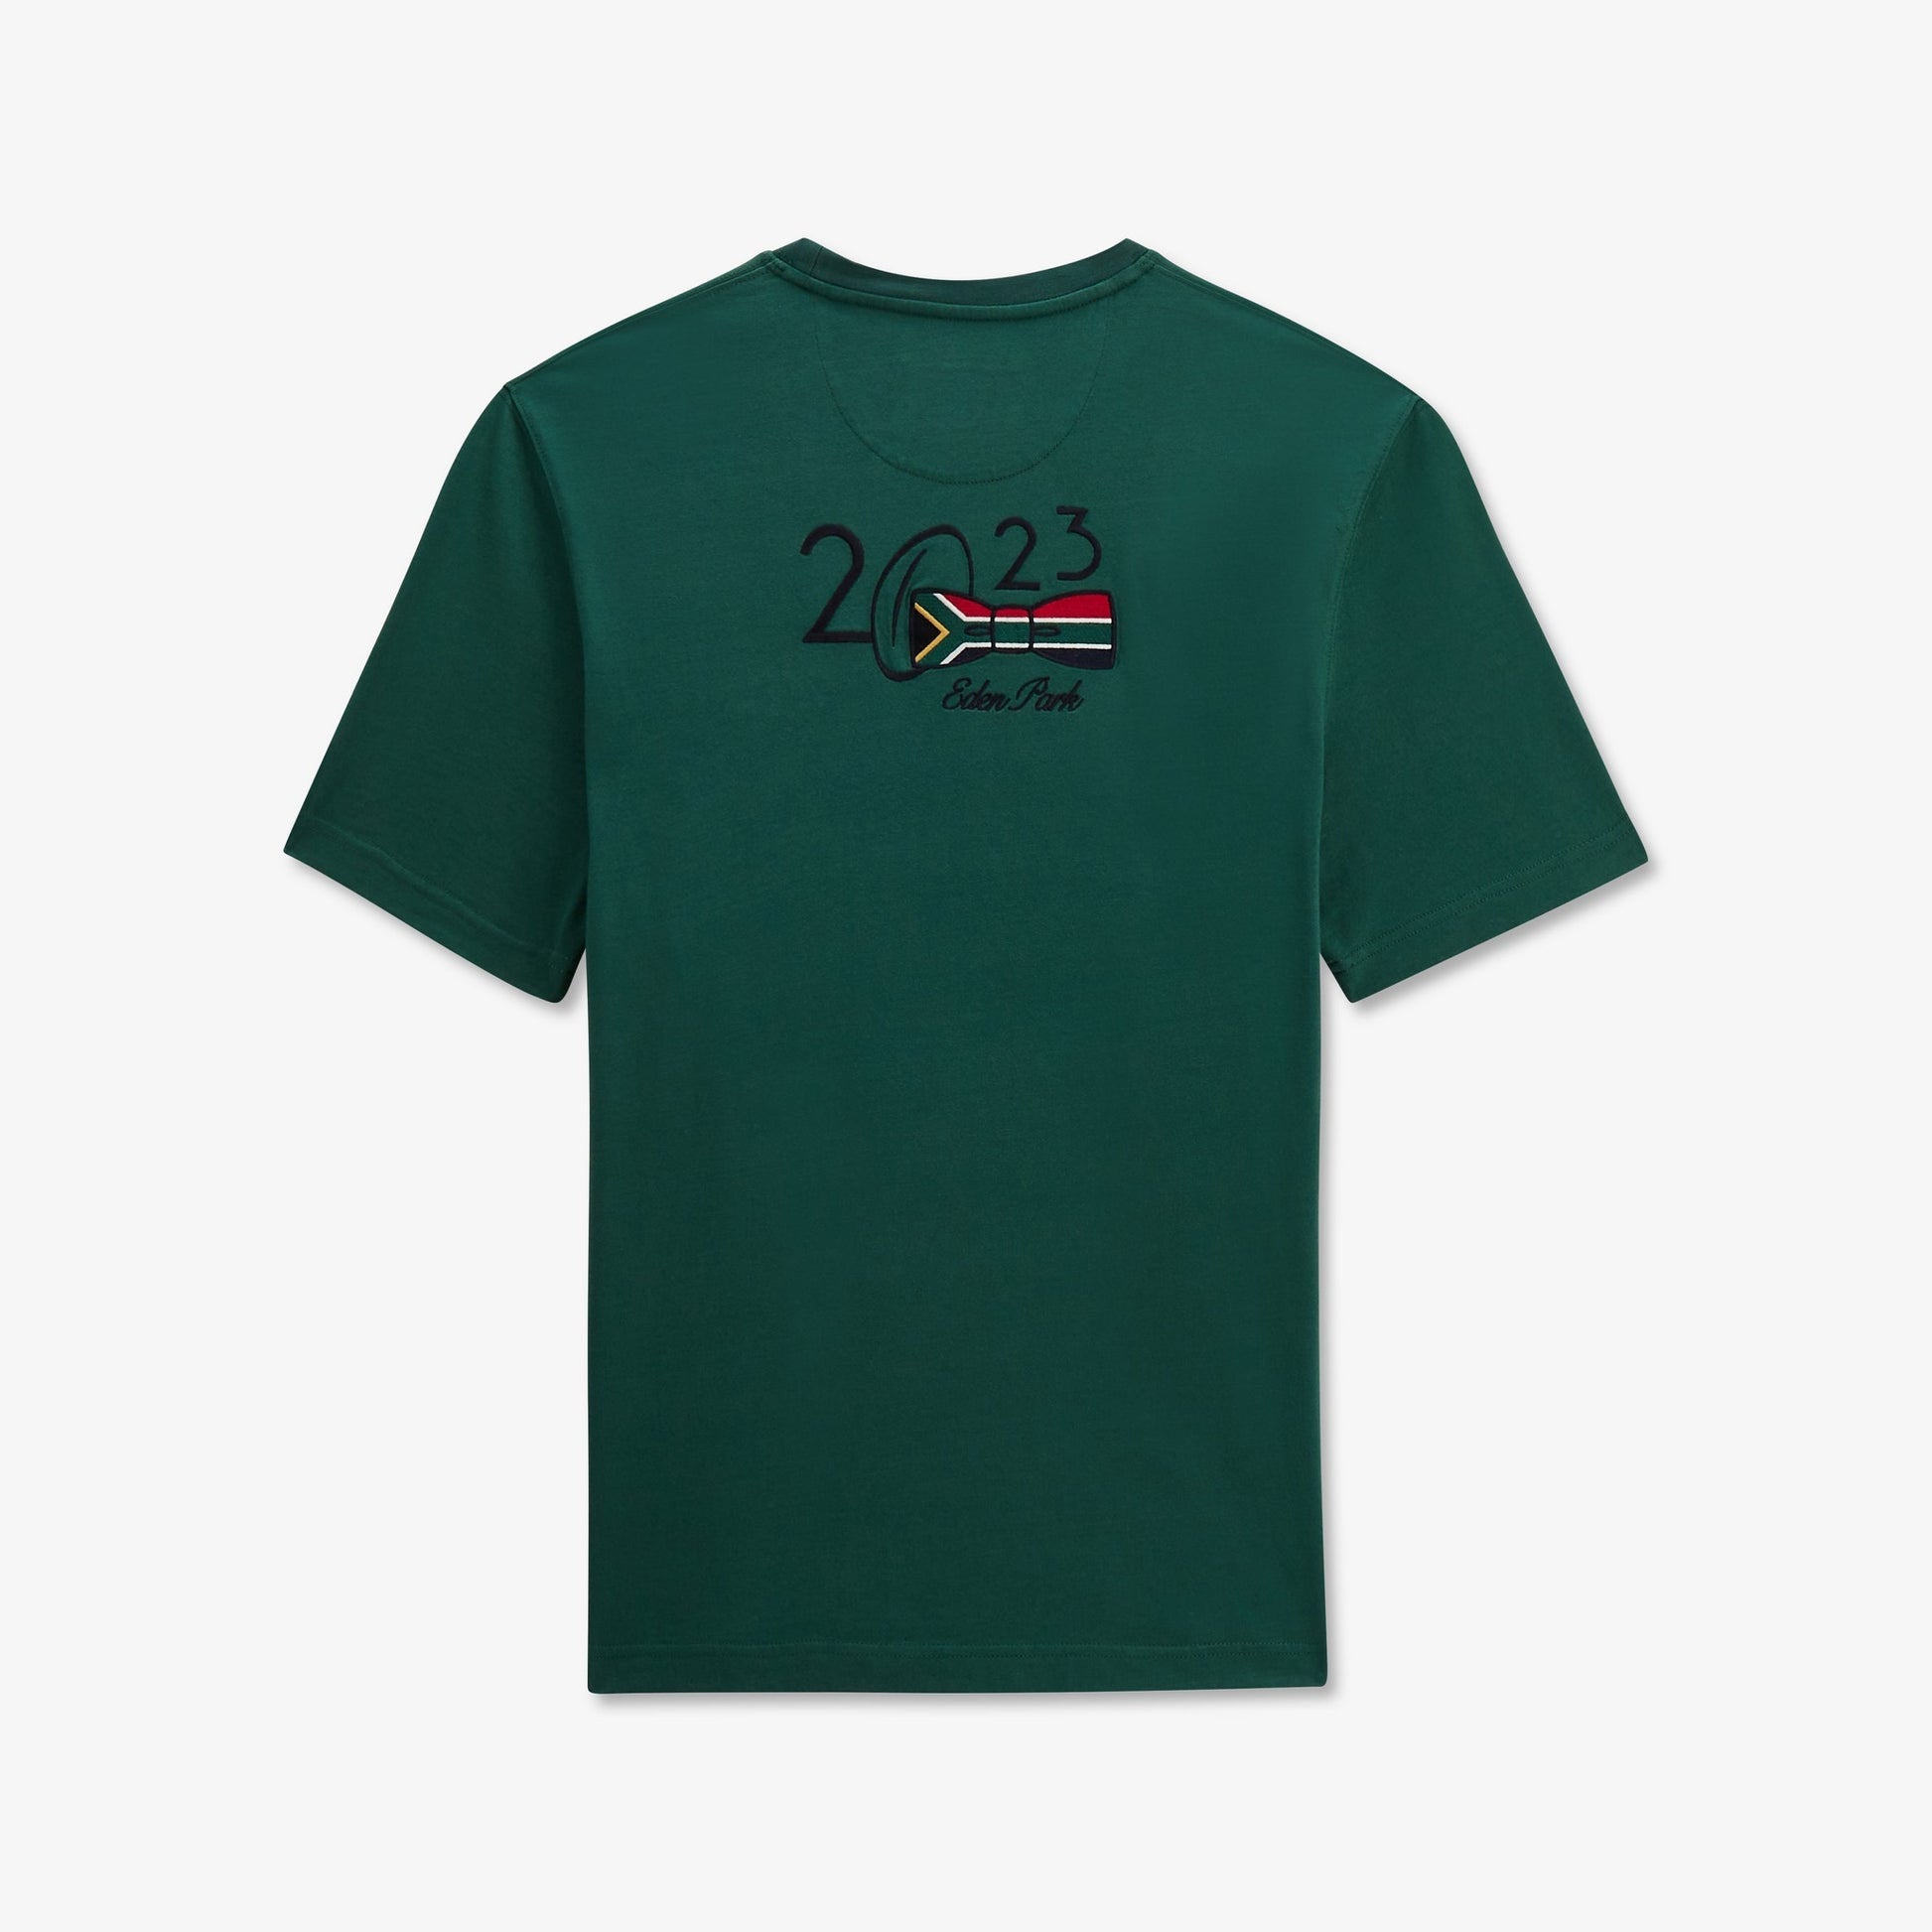 Green T-Shirt With 2023 Embroidery_H23MAITC0010_VEM26_02